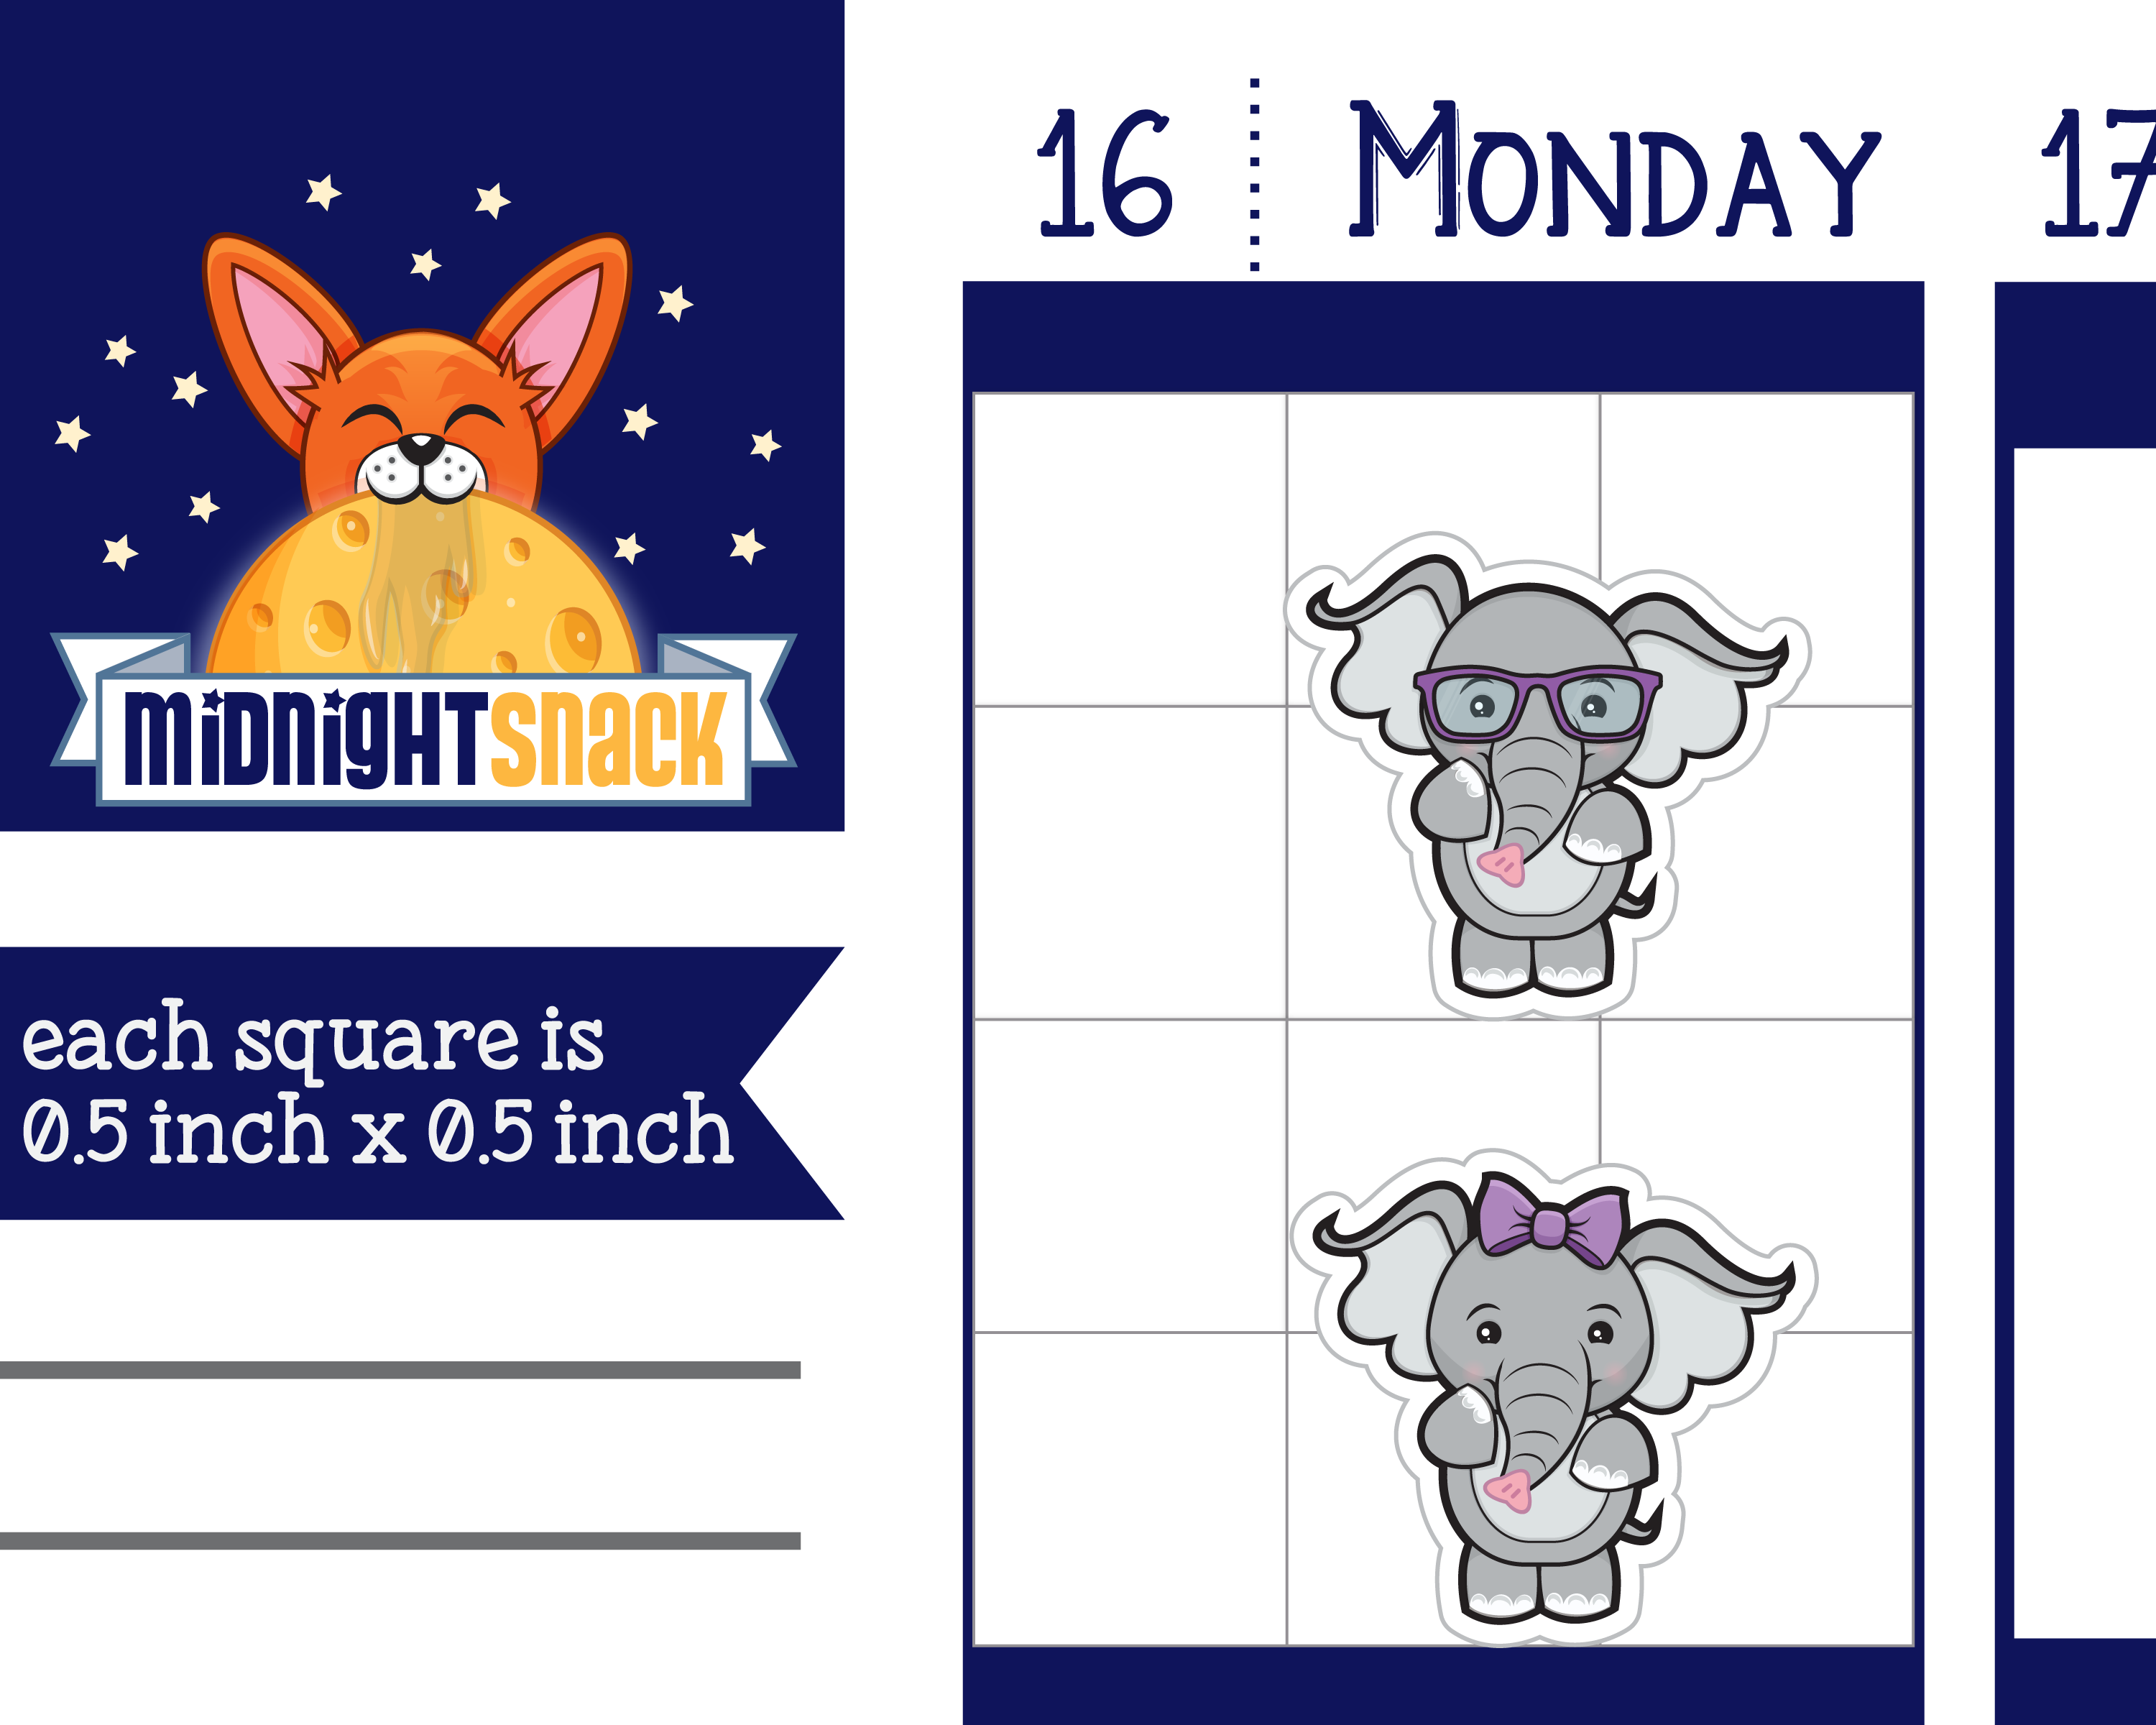 Elephant Icon Decorative Planner Sticker from Midnight Snack Planner, featuring size information